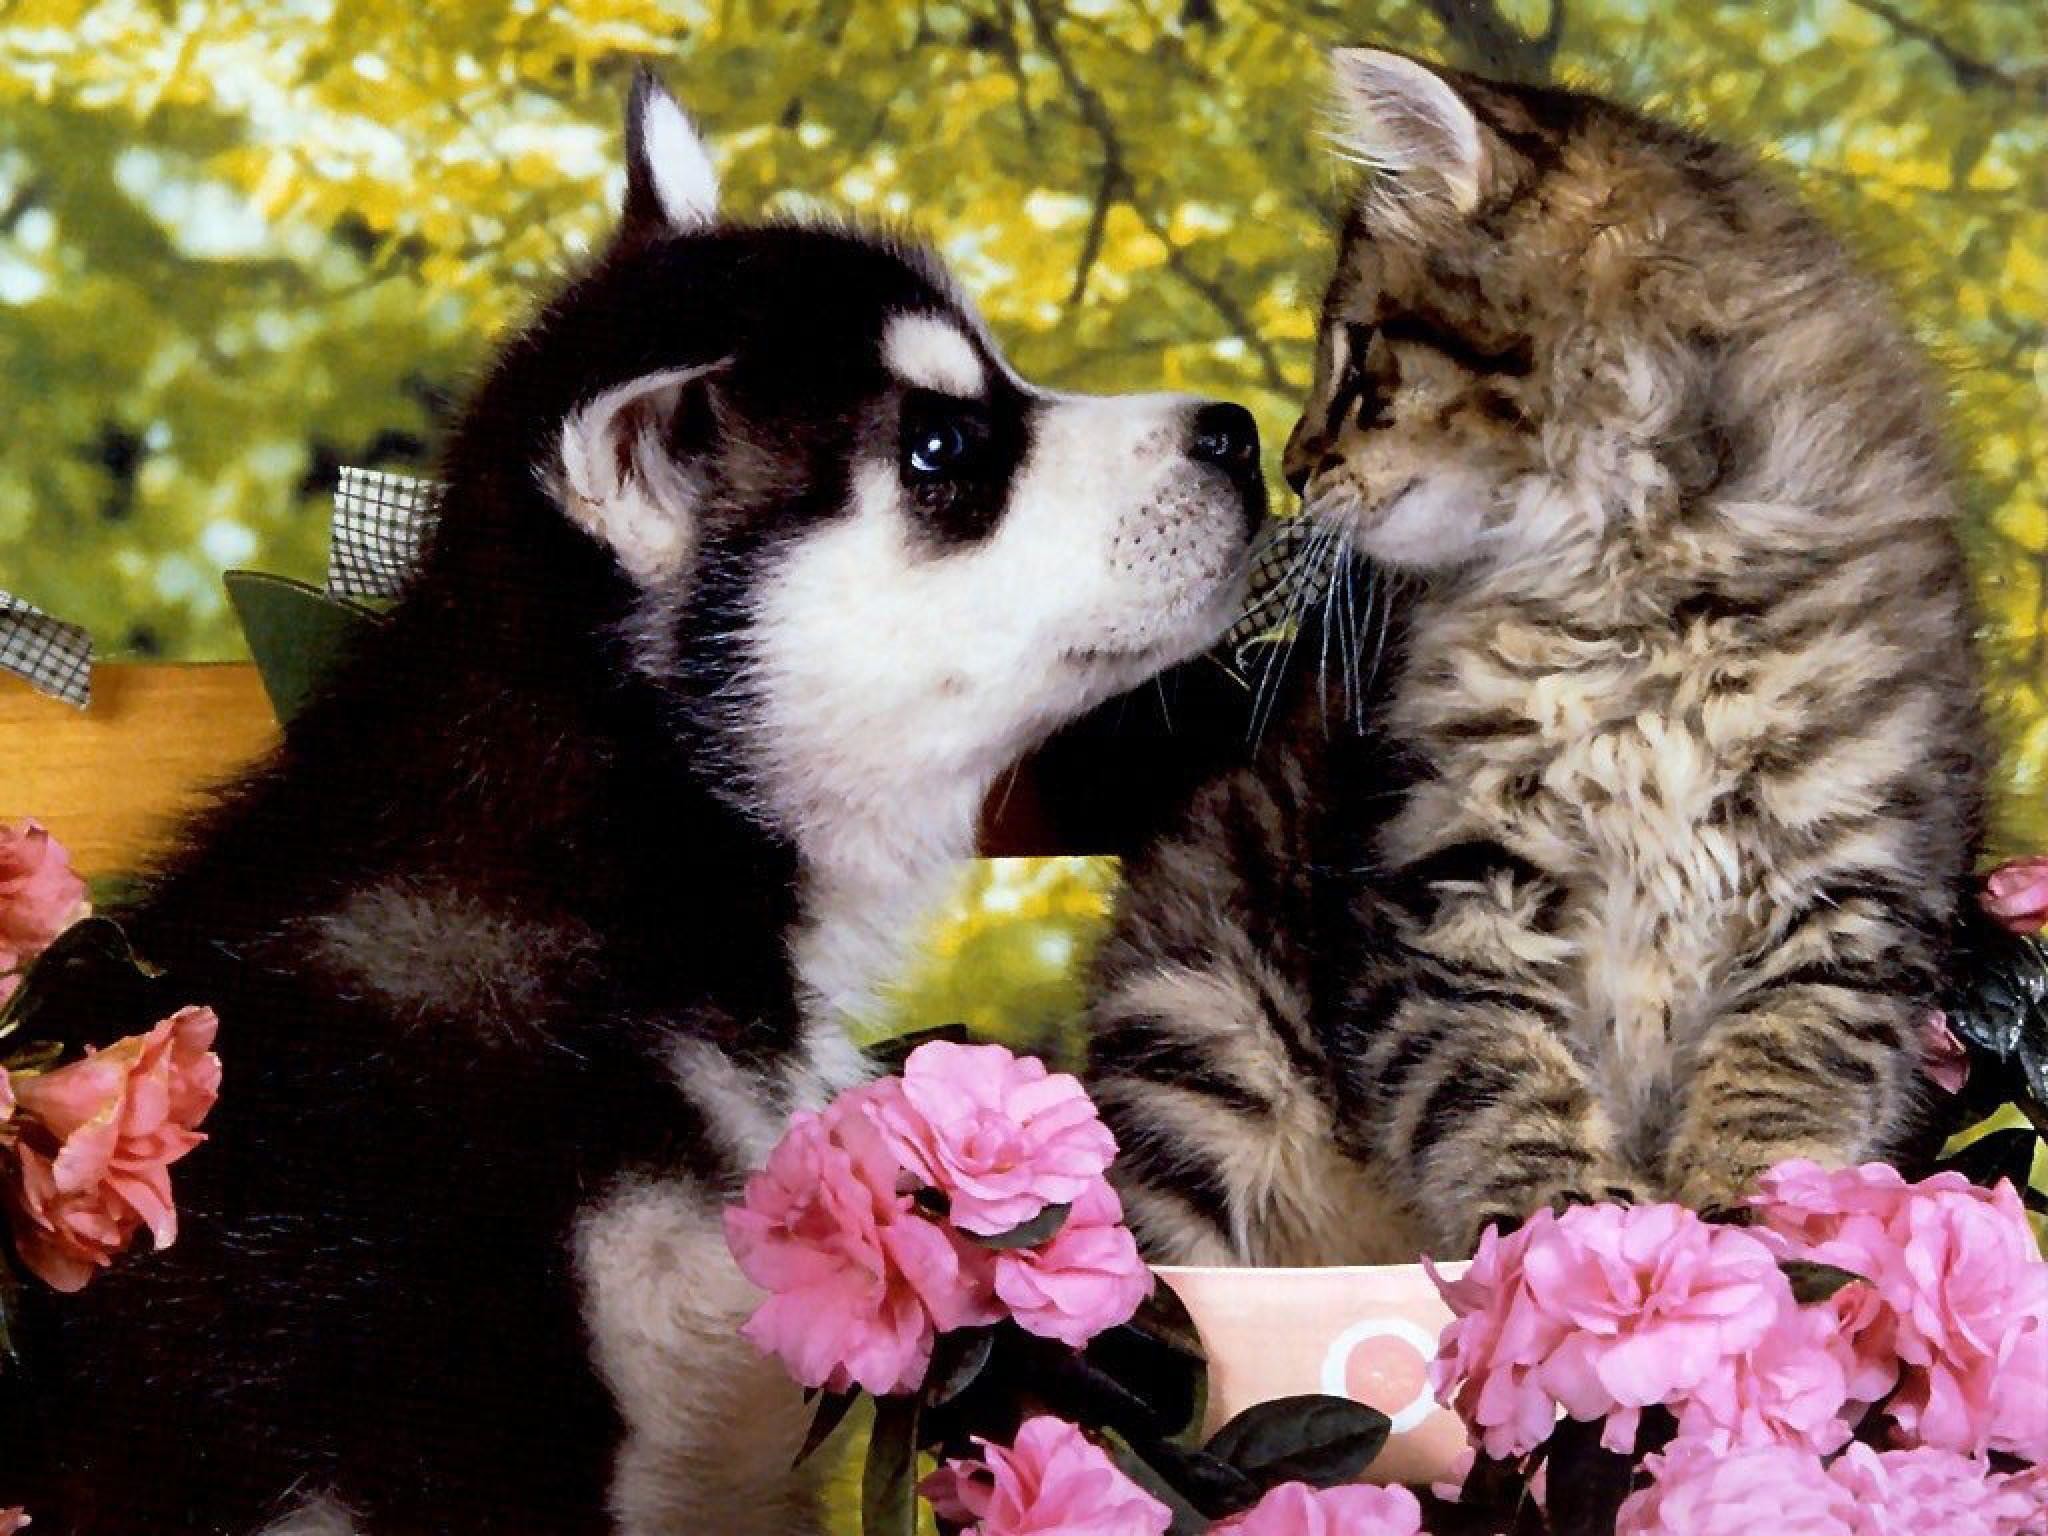 Cute Puppy and Kitten